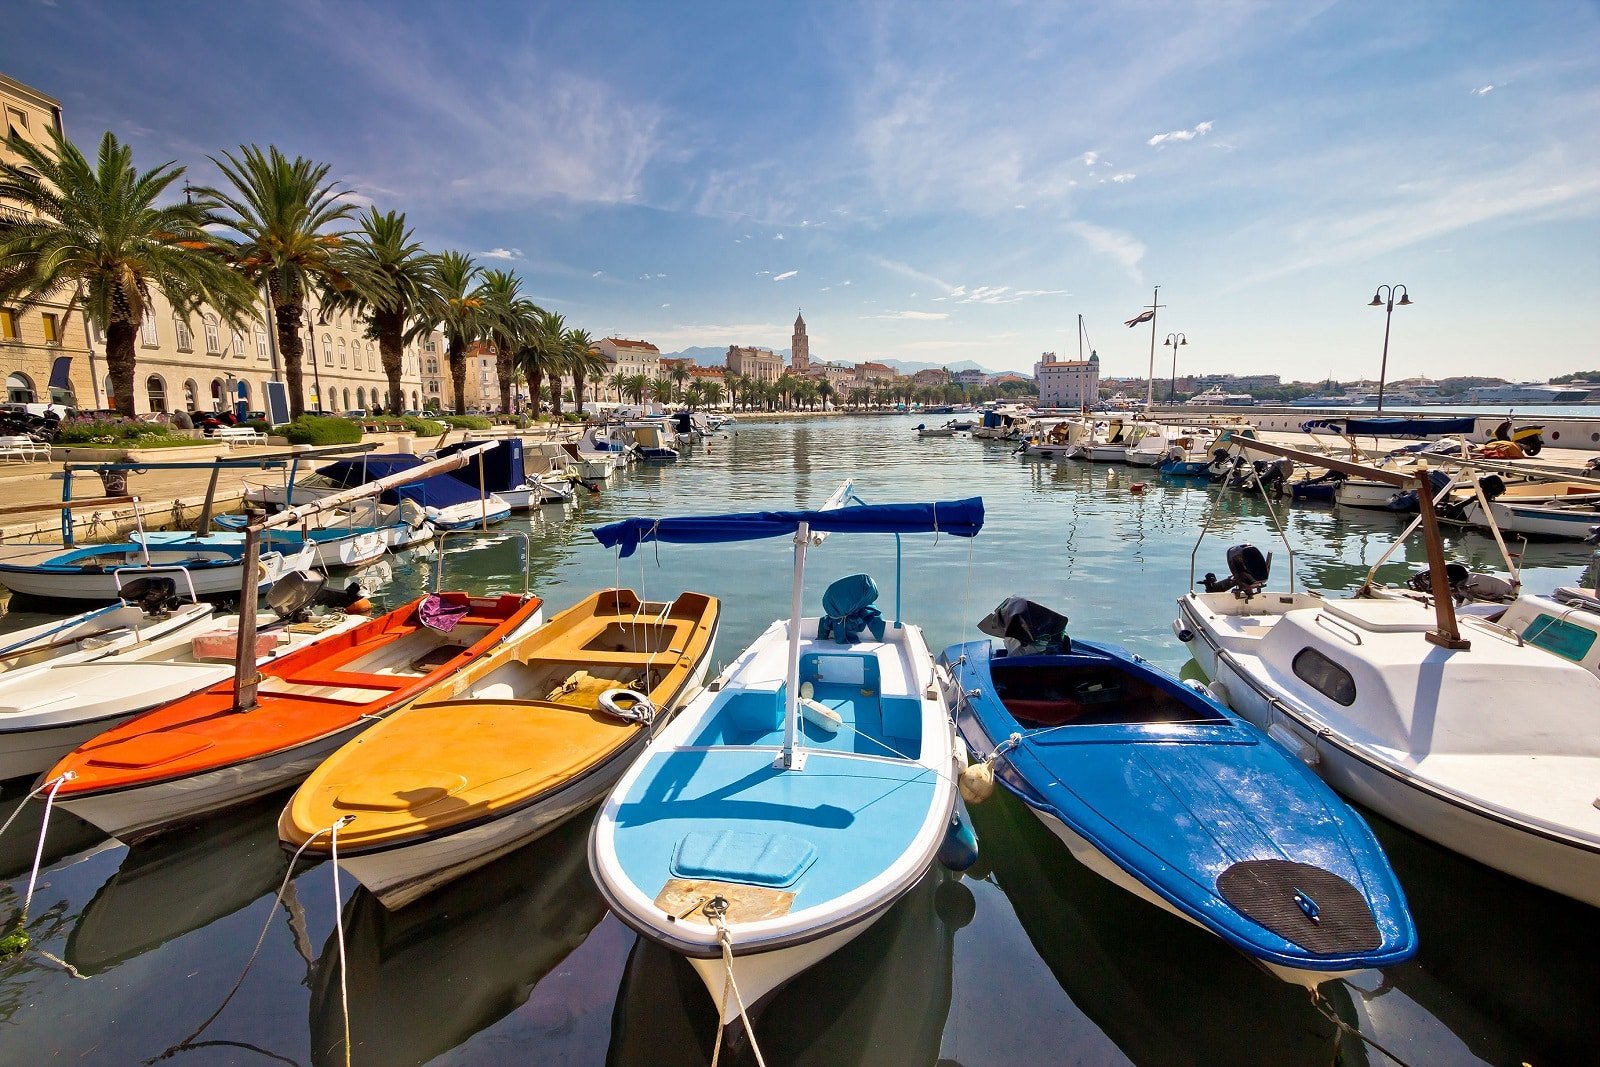 <p><span>The historic city of Split on the Dalmatian coast offers idyllic conditions for learning to sail. The Adriatic Sea’s calm waters and the region’s many islands create a perfect sailing playground. Sailing schools in Split combine instruction with the exploration of Croatia’s stunning coastline.</span></p> <p><b>Insider’s Tip: </b><span>Include island visits to experience Croatia’s diverse maritime landscapes in your sailing course.</span></p> <p><b>When to Travel: </b><span>May to September for calm seas and pleasant weather.</span></p> <p><b>How to Get There: </b><span>Fly to Split Airport or travel by ferry from other parts of Croatia.</span></p>